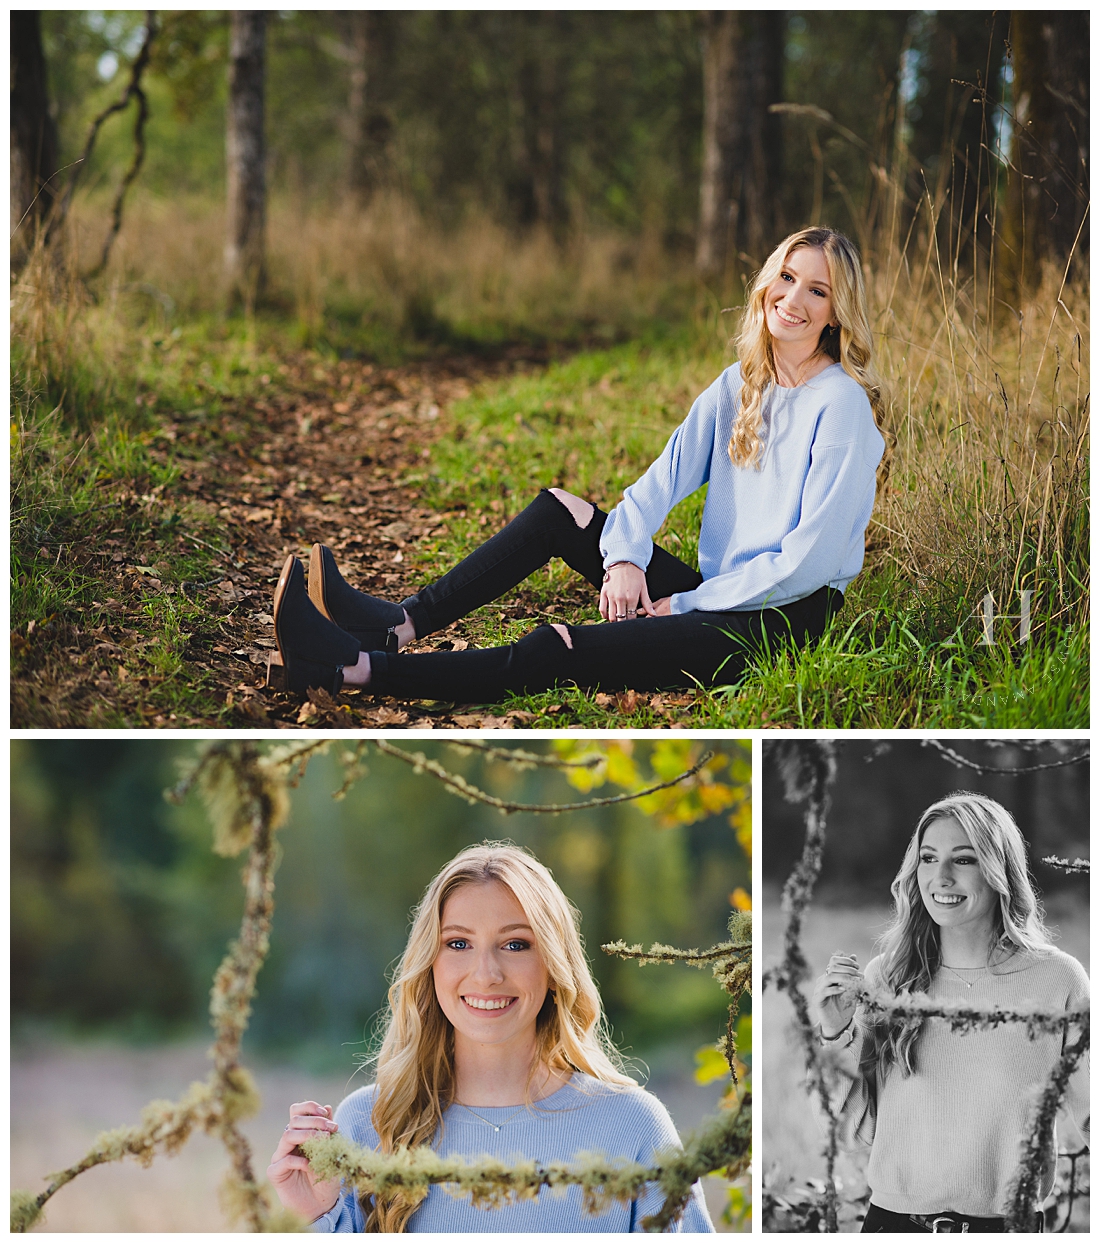 Senior Portraits on a Hiking Trail | Natural PNW Senior Portraits, Outfit Ideas for Fall Portraits, Casual Senior Portraits at Fort Steilacoom | Photographed by Amanda Howse Photography, Tacoma's Best Senior Photographer